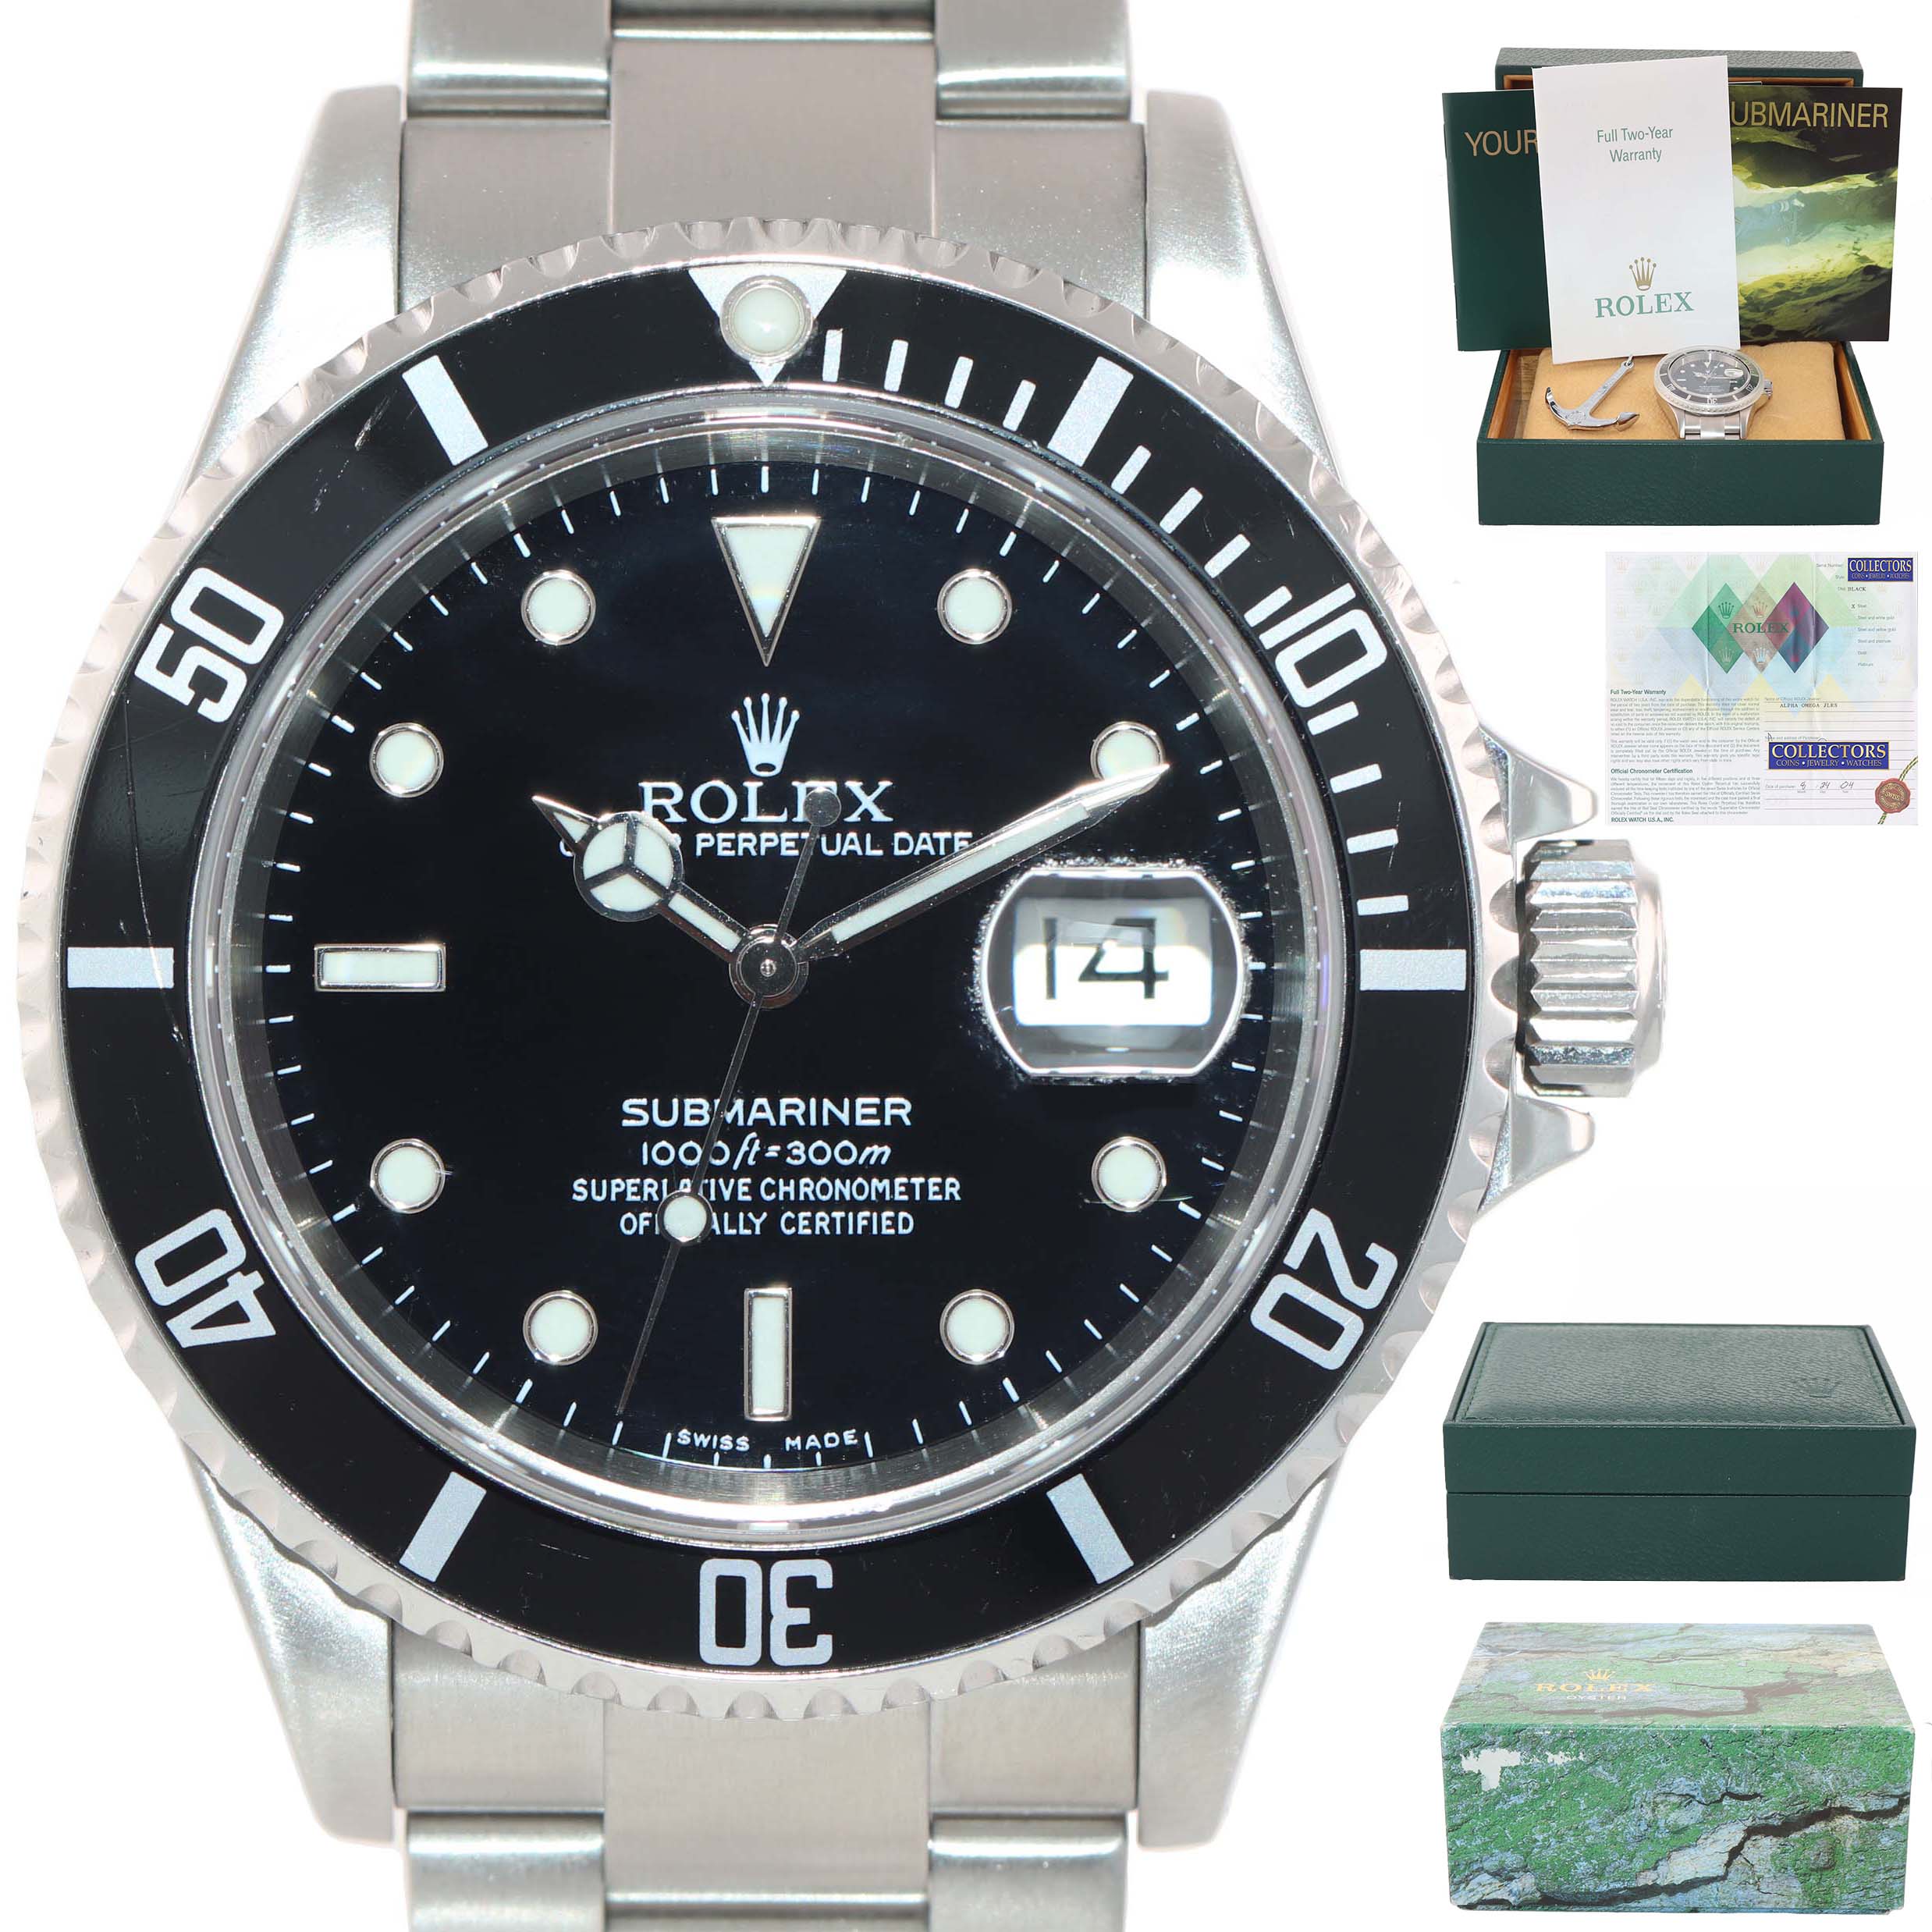 PAPERS 2004 Rolex Submariner Date 16610 